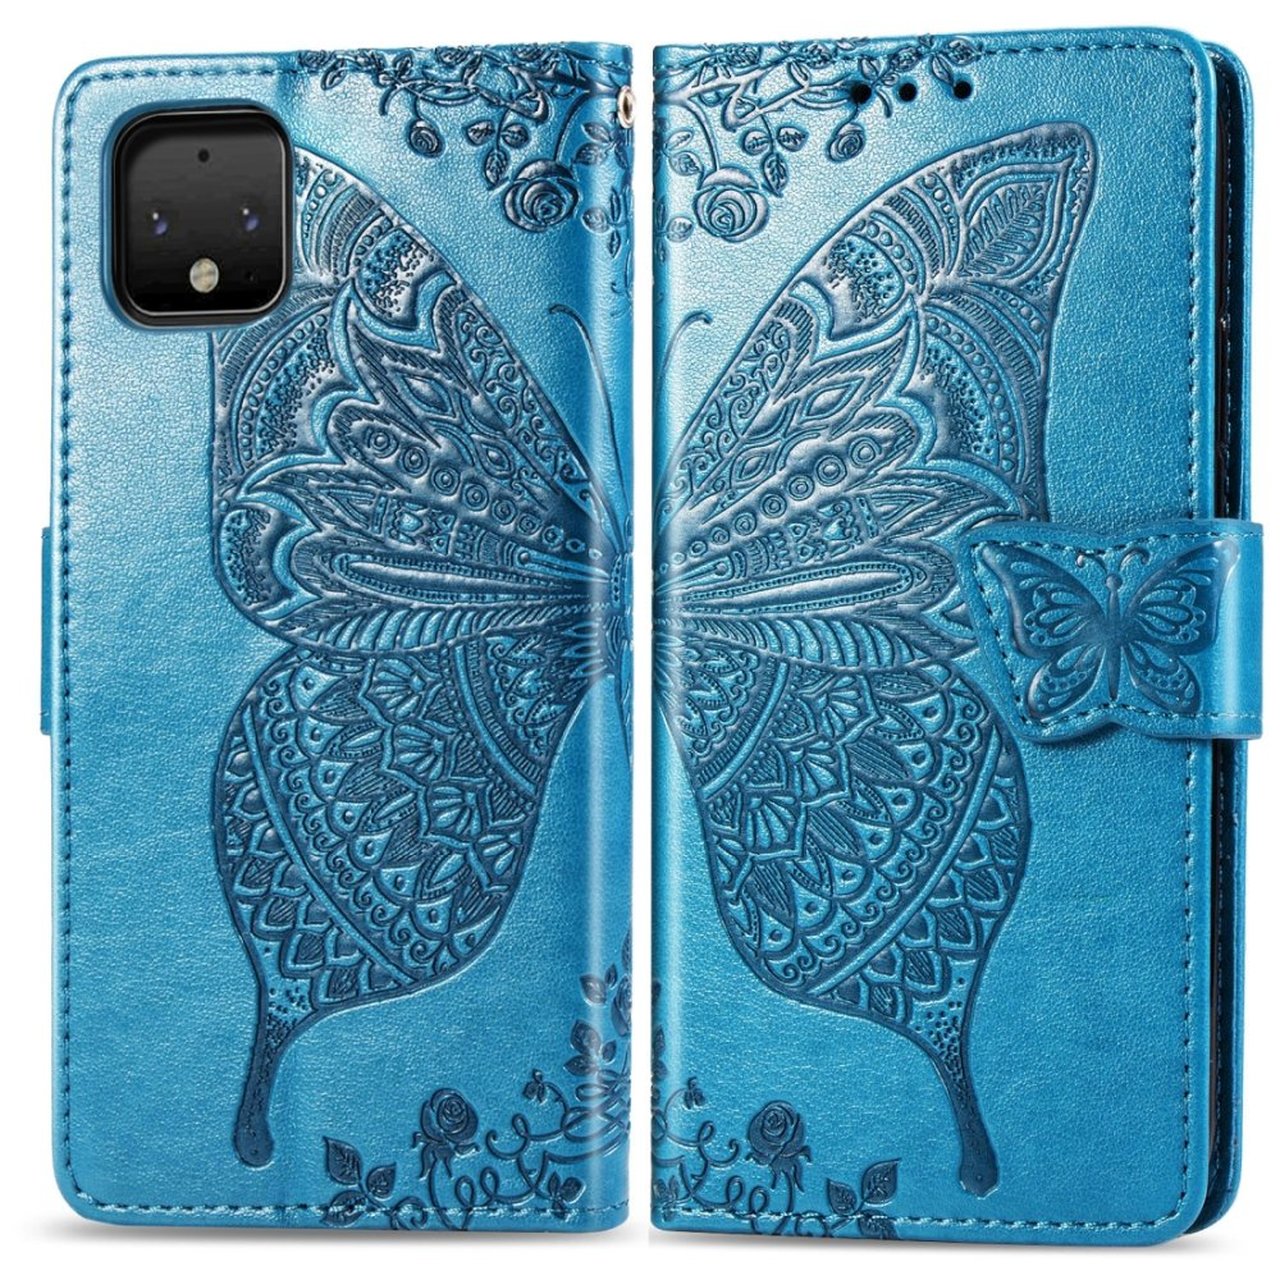 Google Pixel 4 XL Case Butterfly Embossed PU Leather Wallet Protective Cover Stand